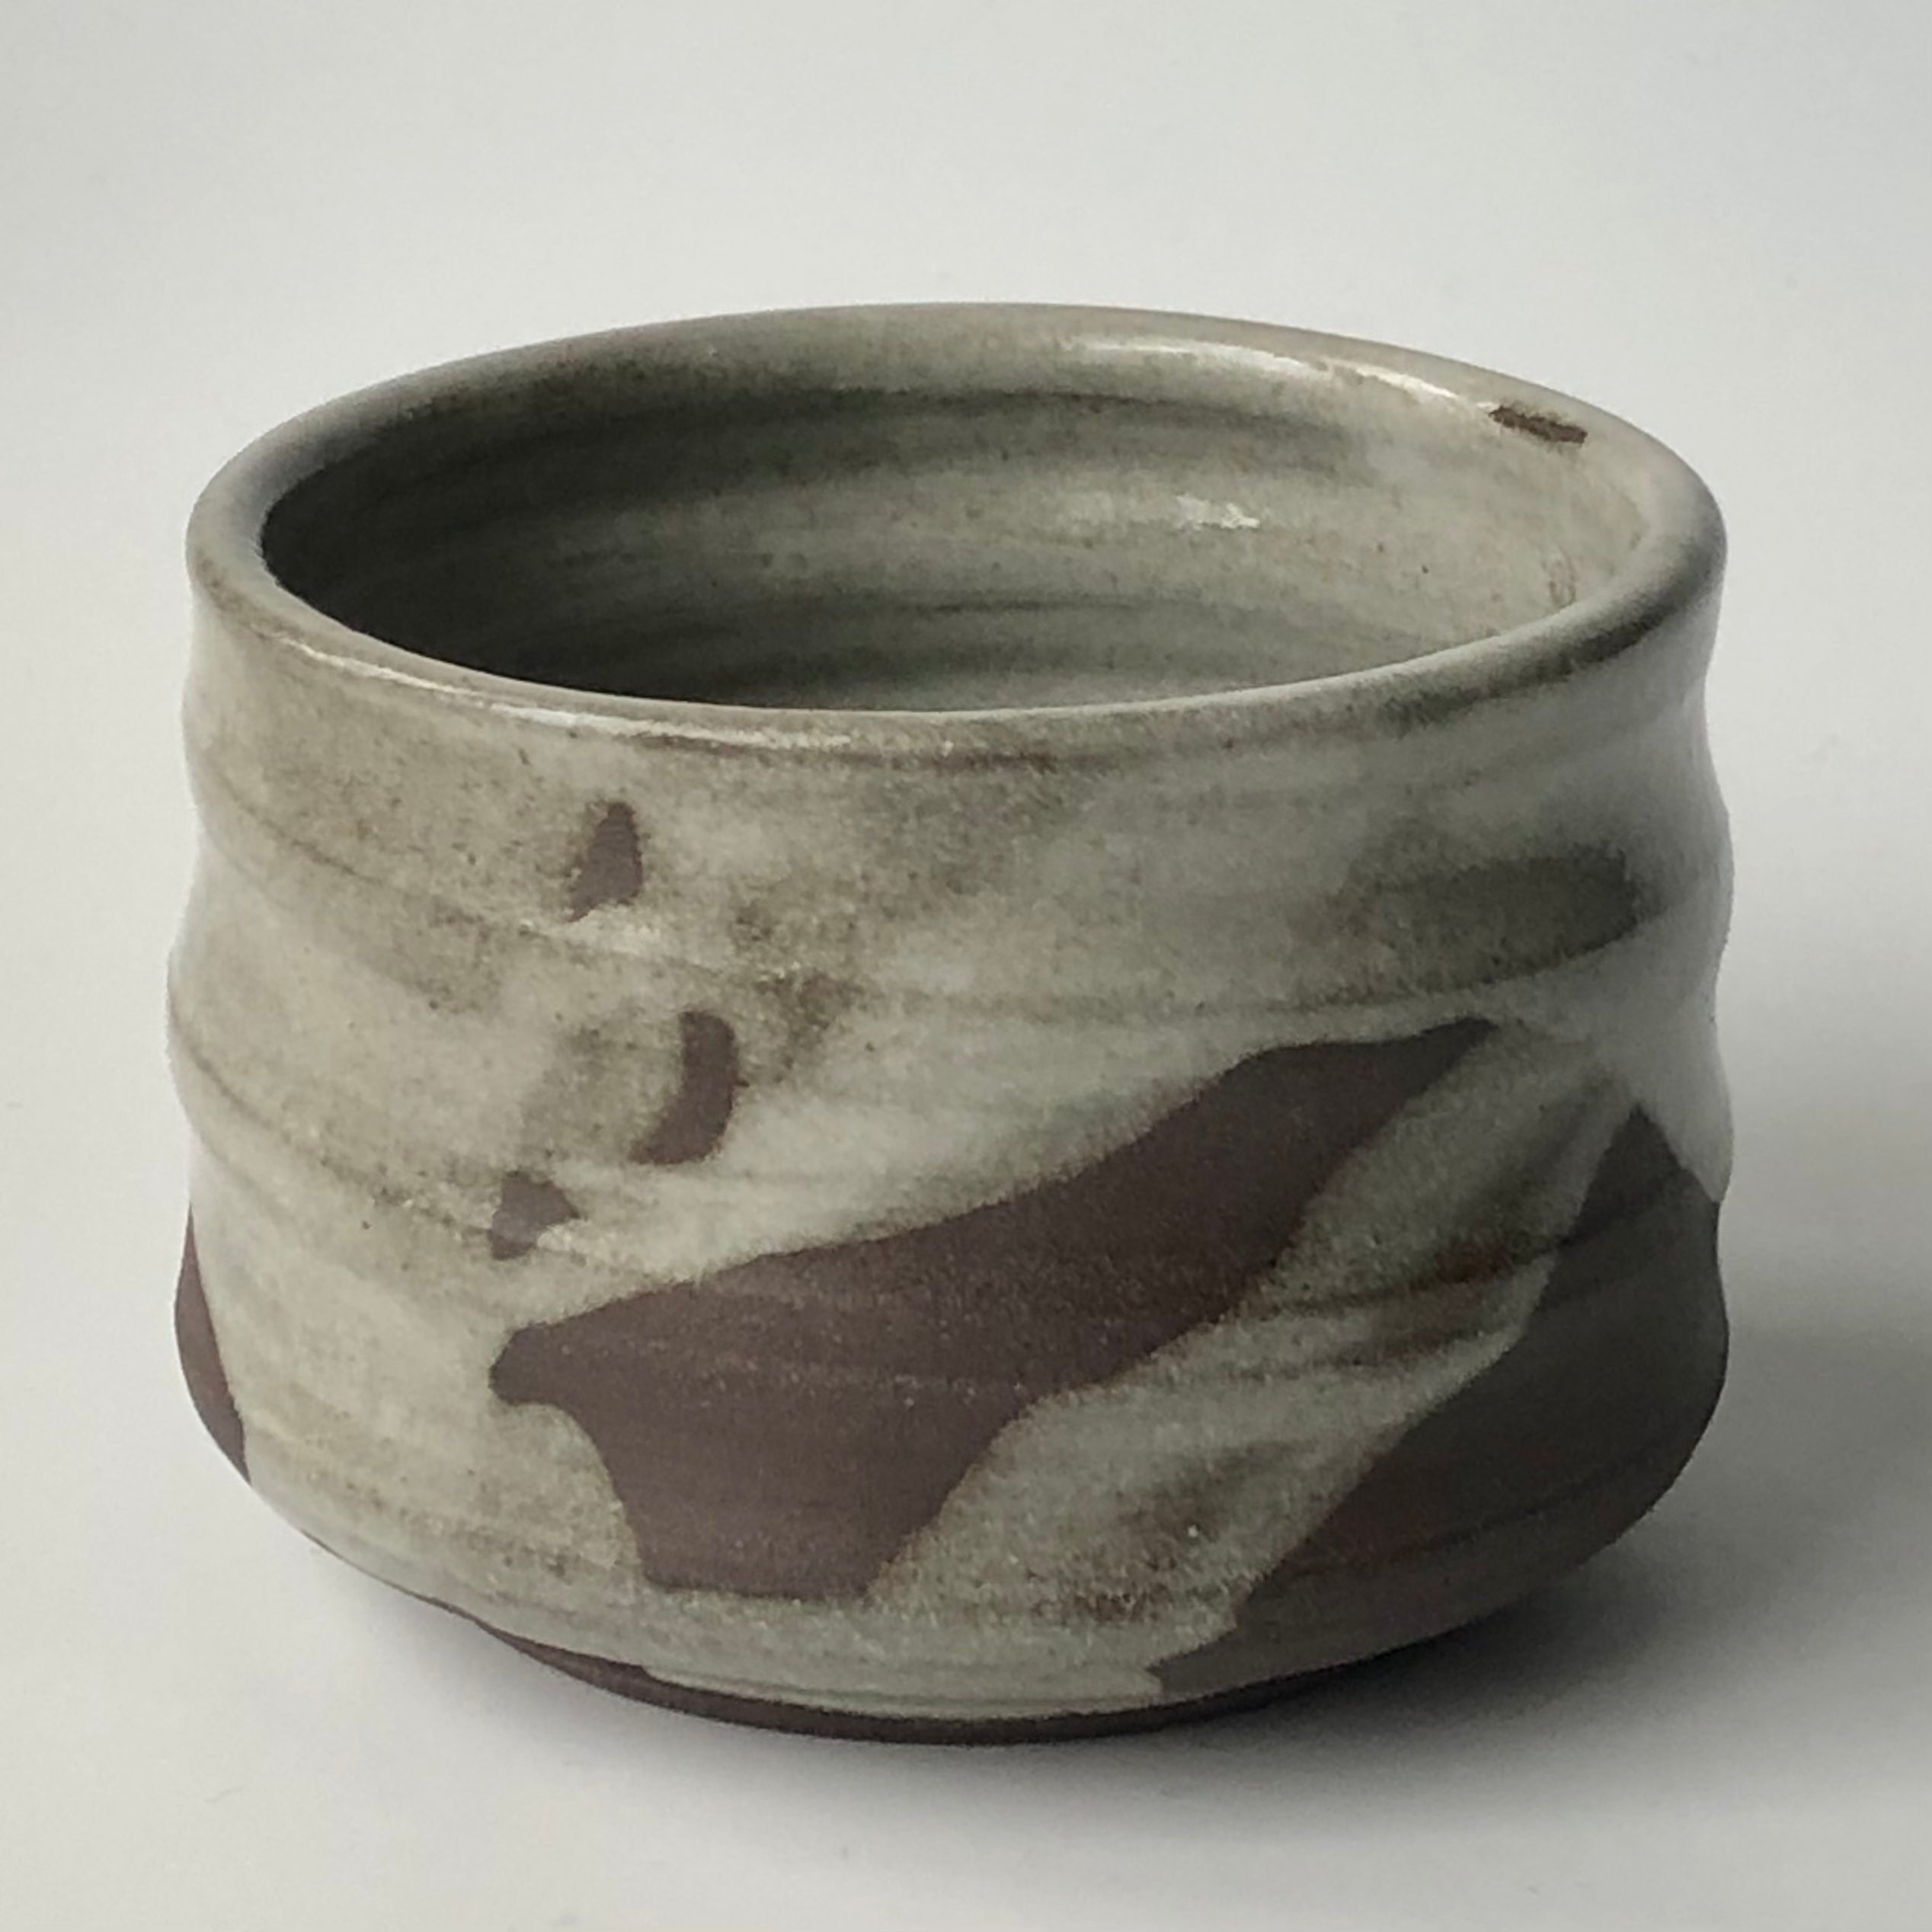 #4 Black Clay Chawan (Teabowl) Splashed with Apple Orchard Ash Glaze